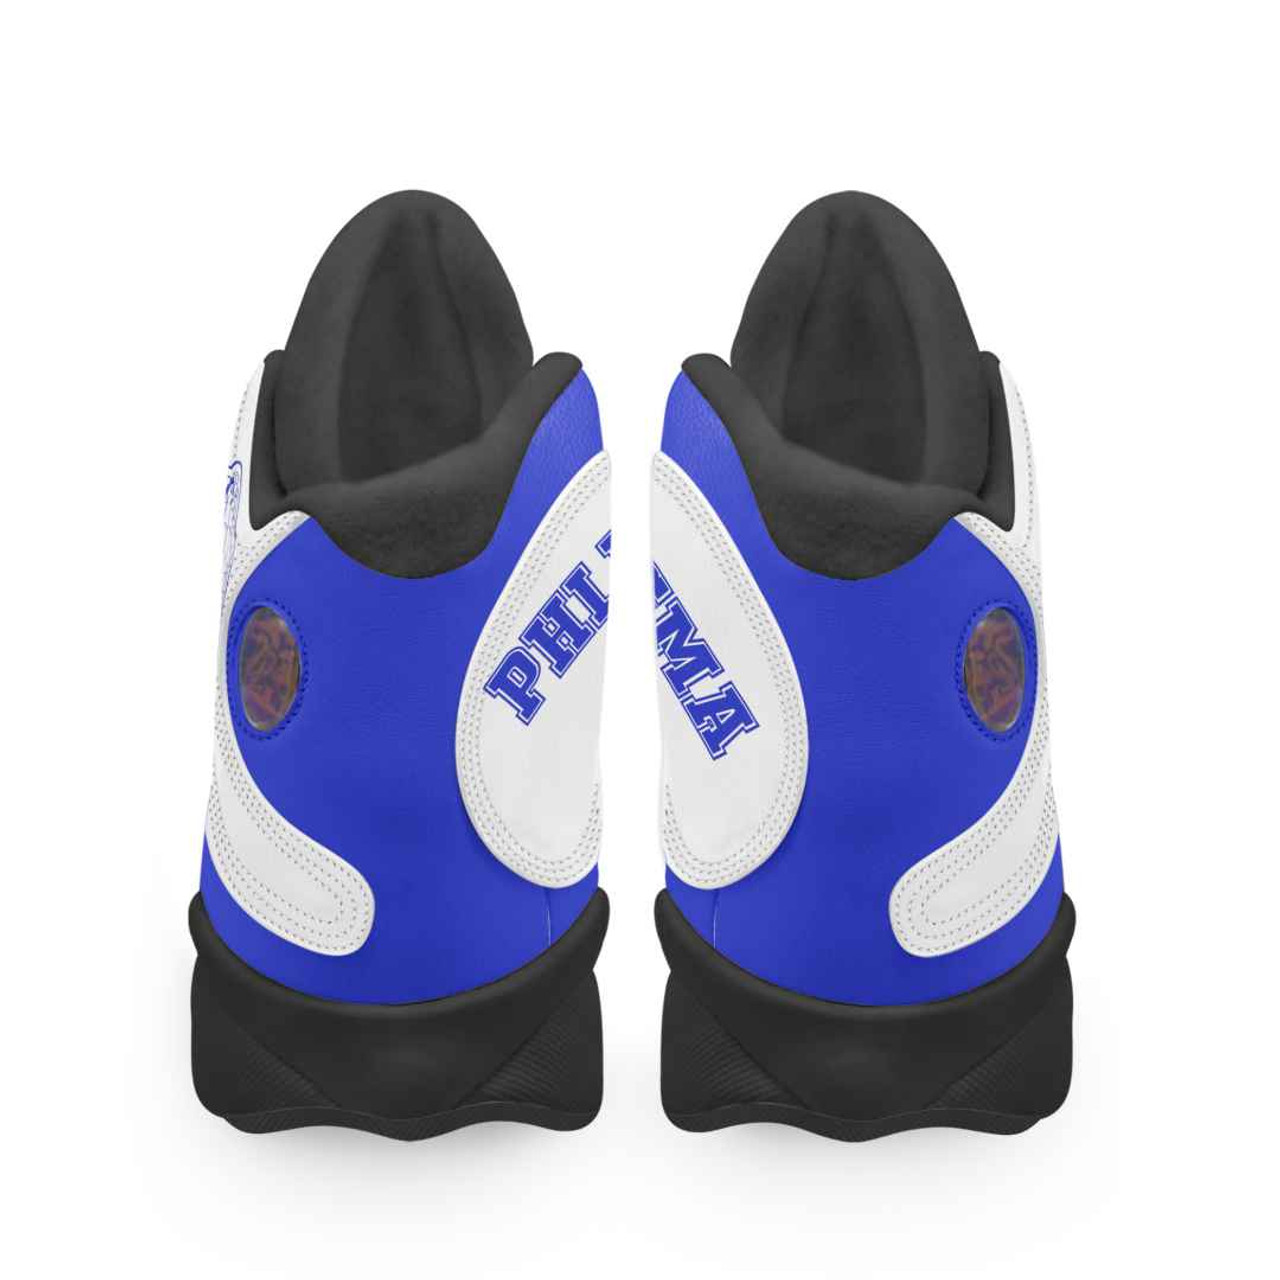 Phi Beta Sigma High Top Basketball Shoes J 13 - Fraternity Dove With Hand Gesture High Top Sneakers J 13